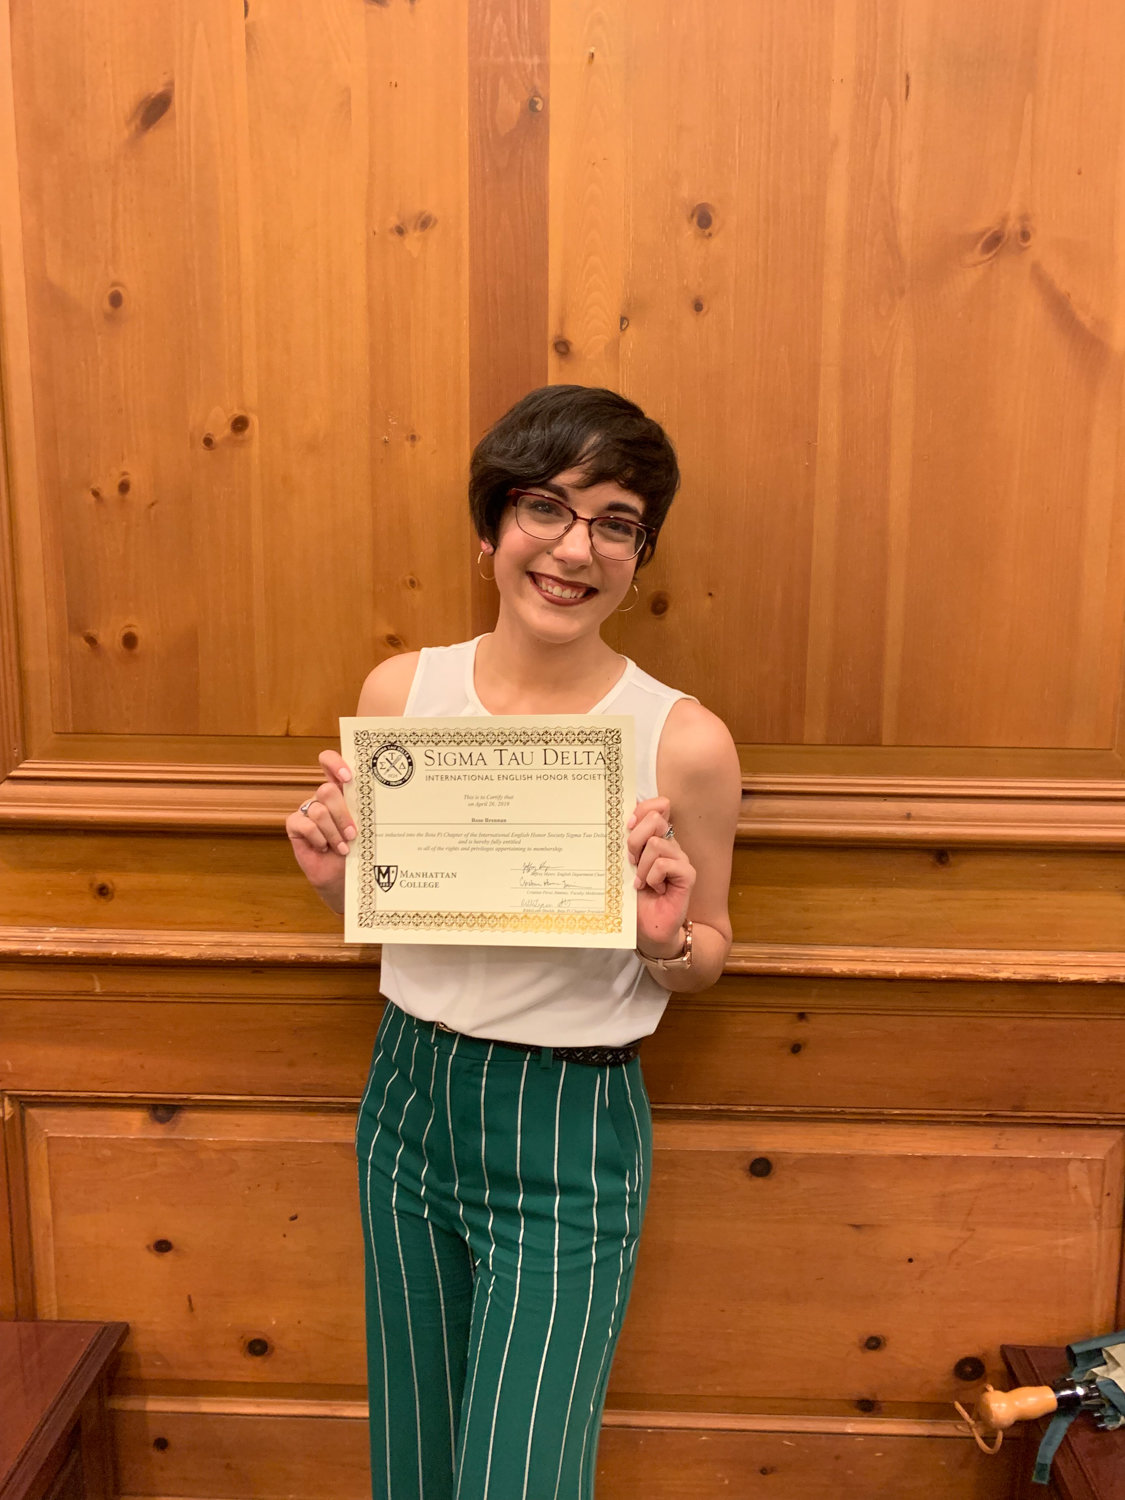 Rose Brennan was inducted as a junior into Sigma Tau Delta, the national English honor society, in 2019. Brennan is graduating from Manhattan College in the midst of the coronavirus pandemic.